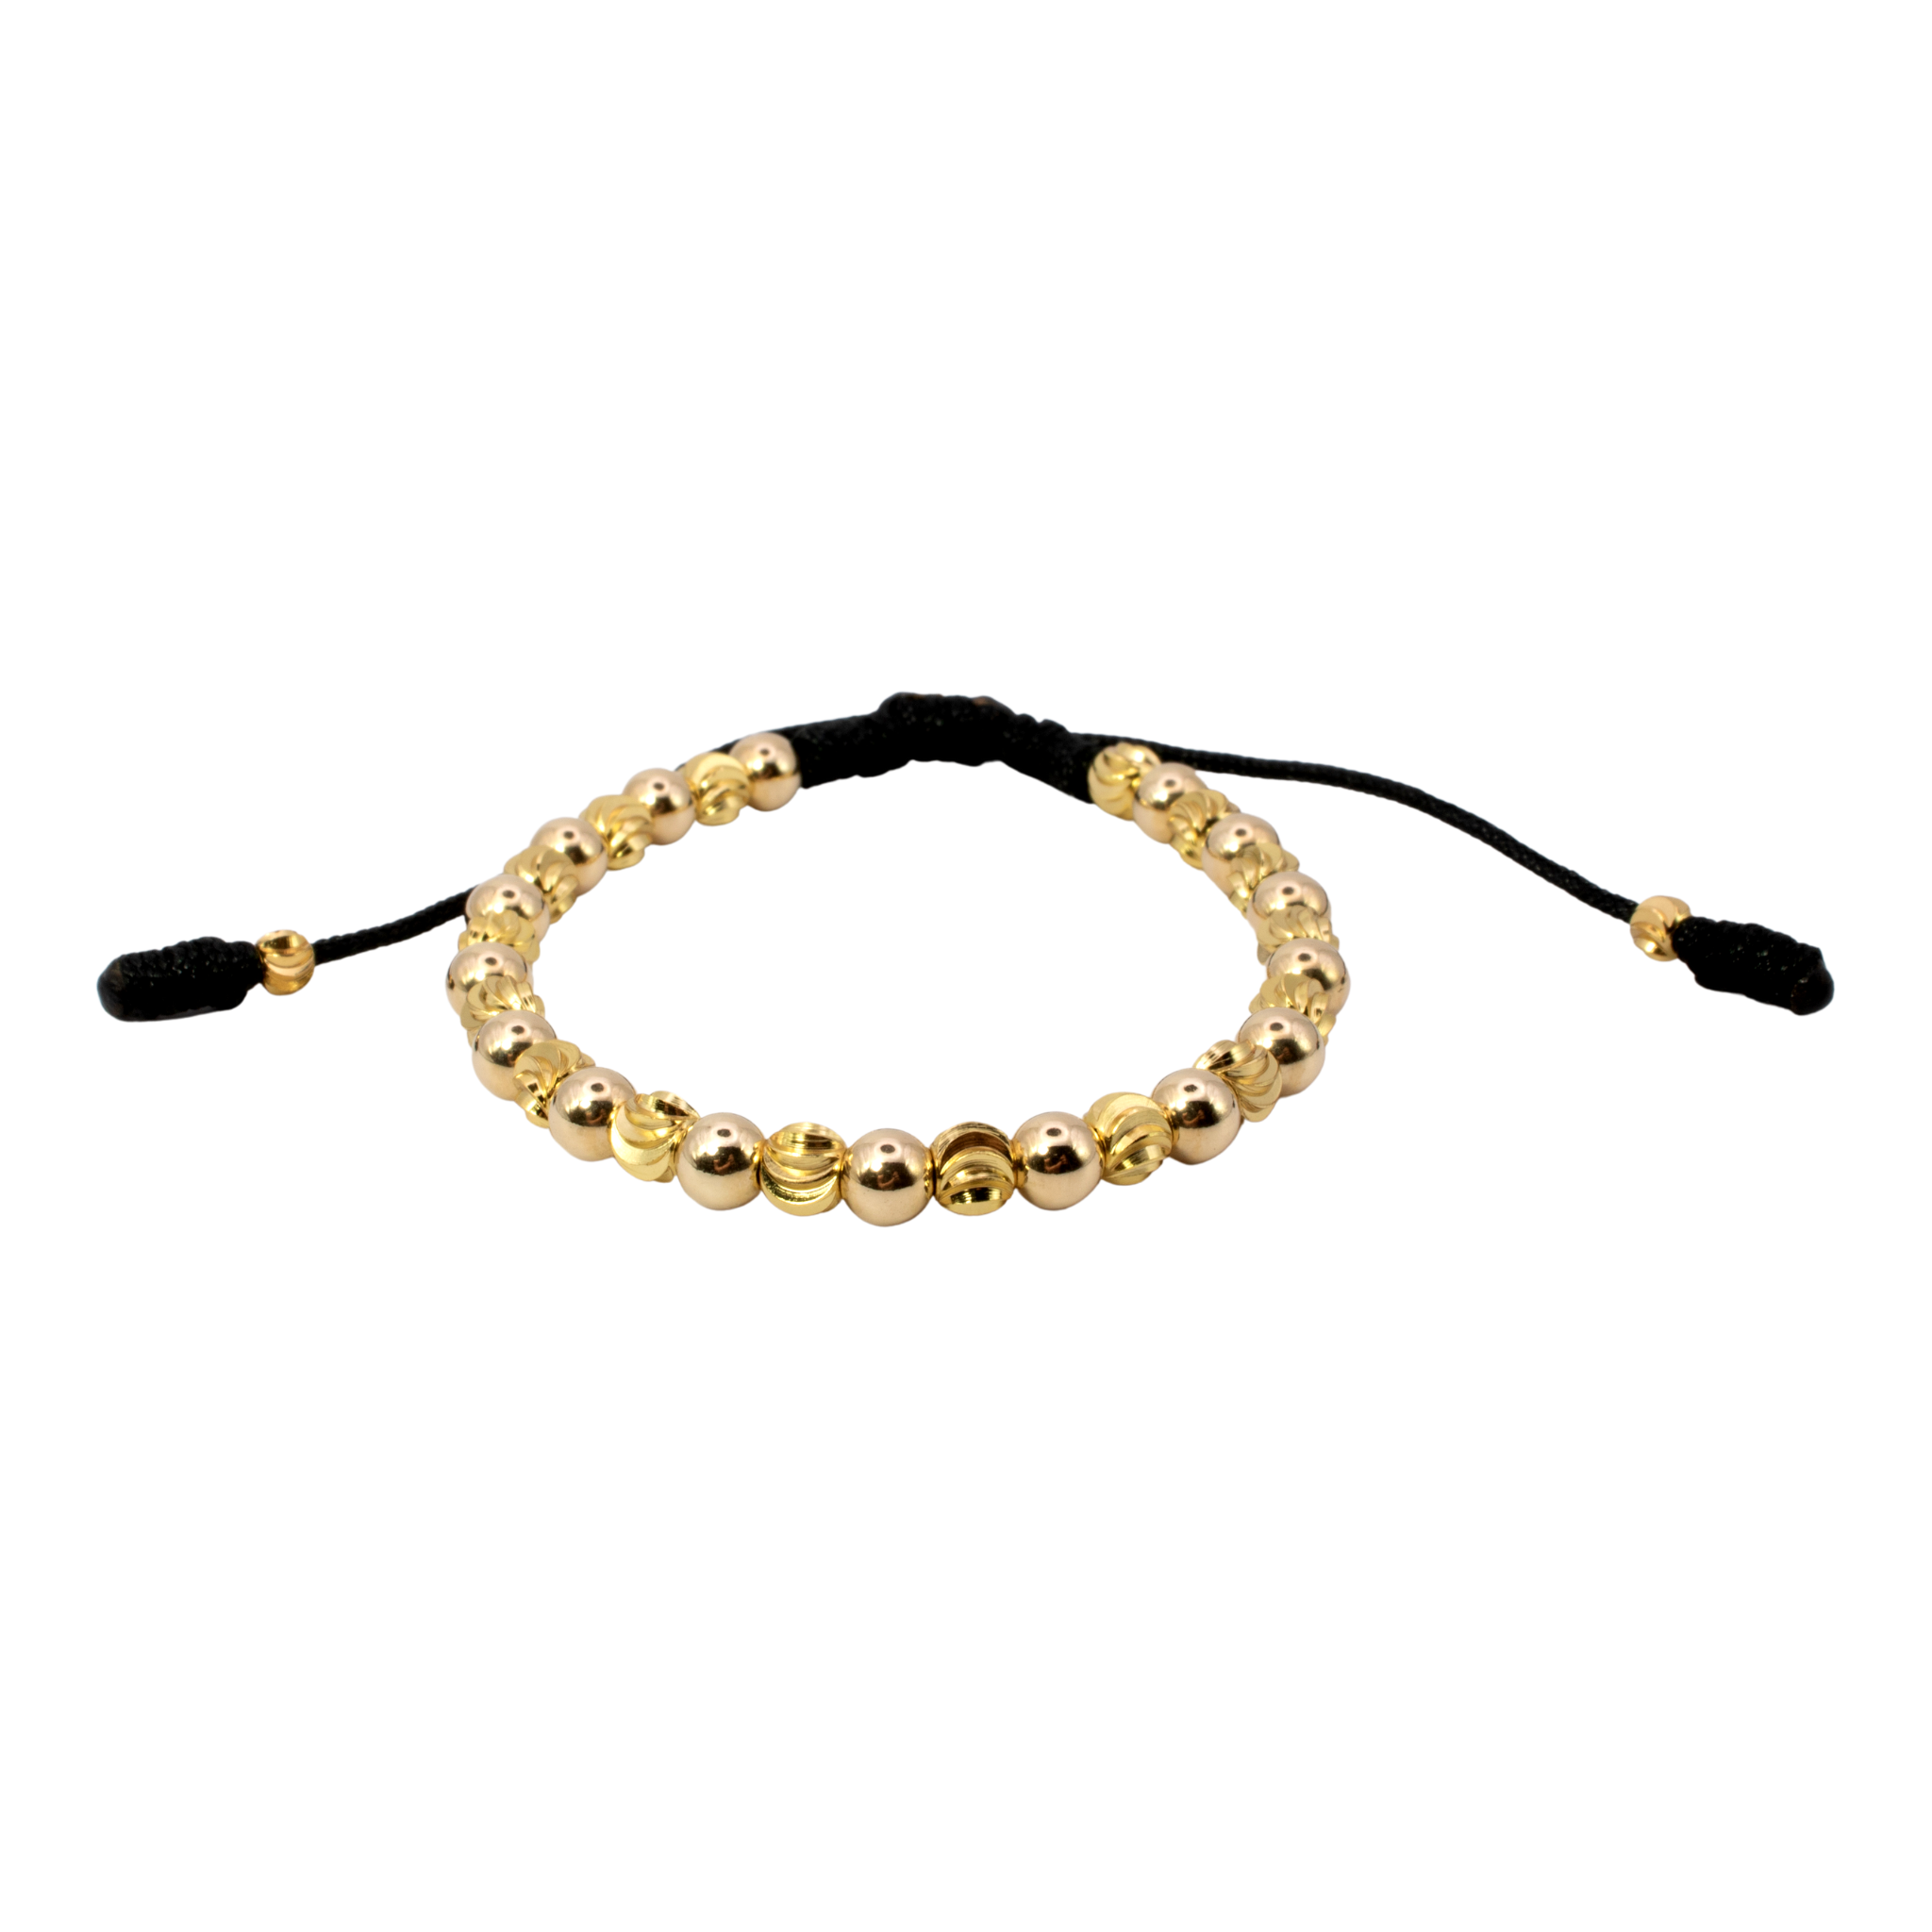 Buy TRISHTY® 925 Italian Silver and Yellow GOLD Bracelet For Women and  Young girl (3 Round) at Amazon.in